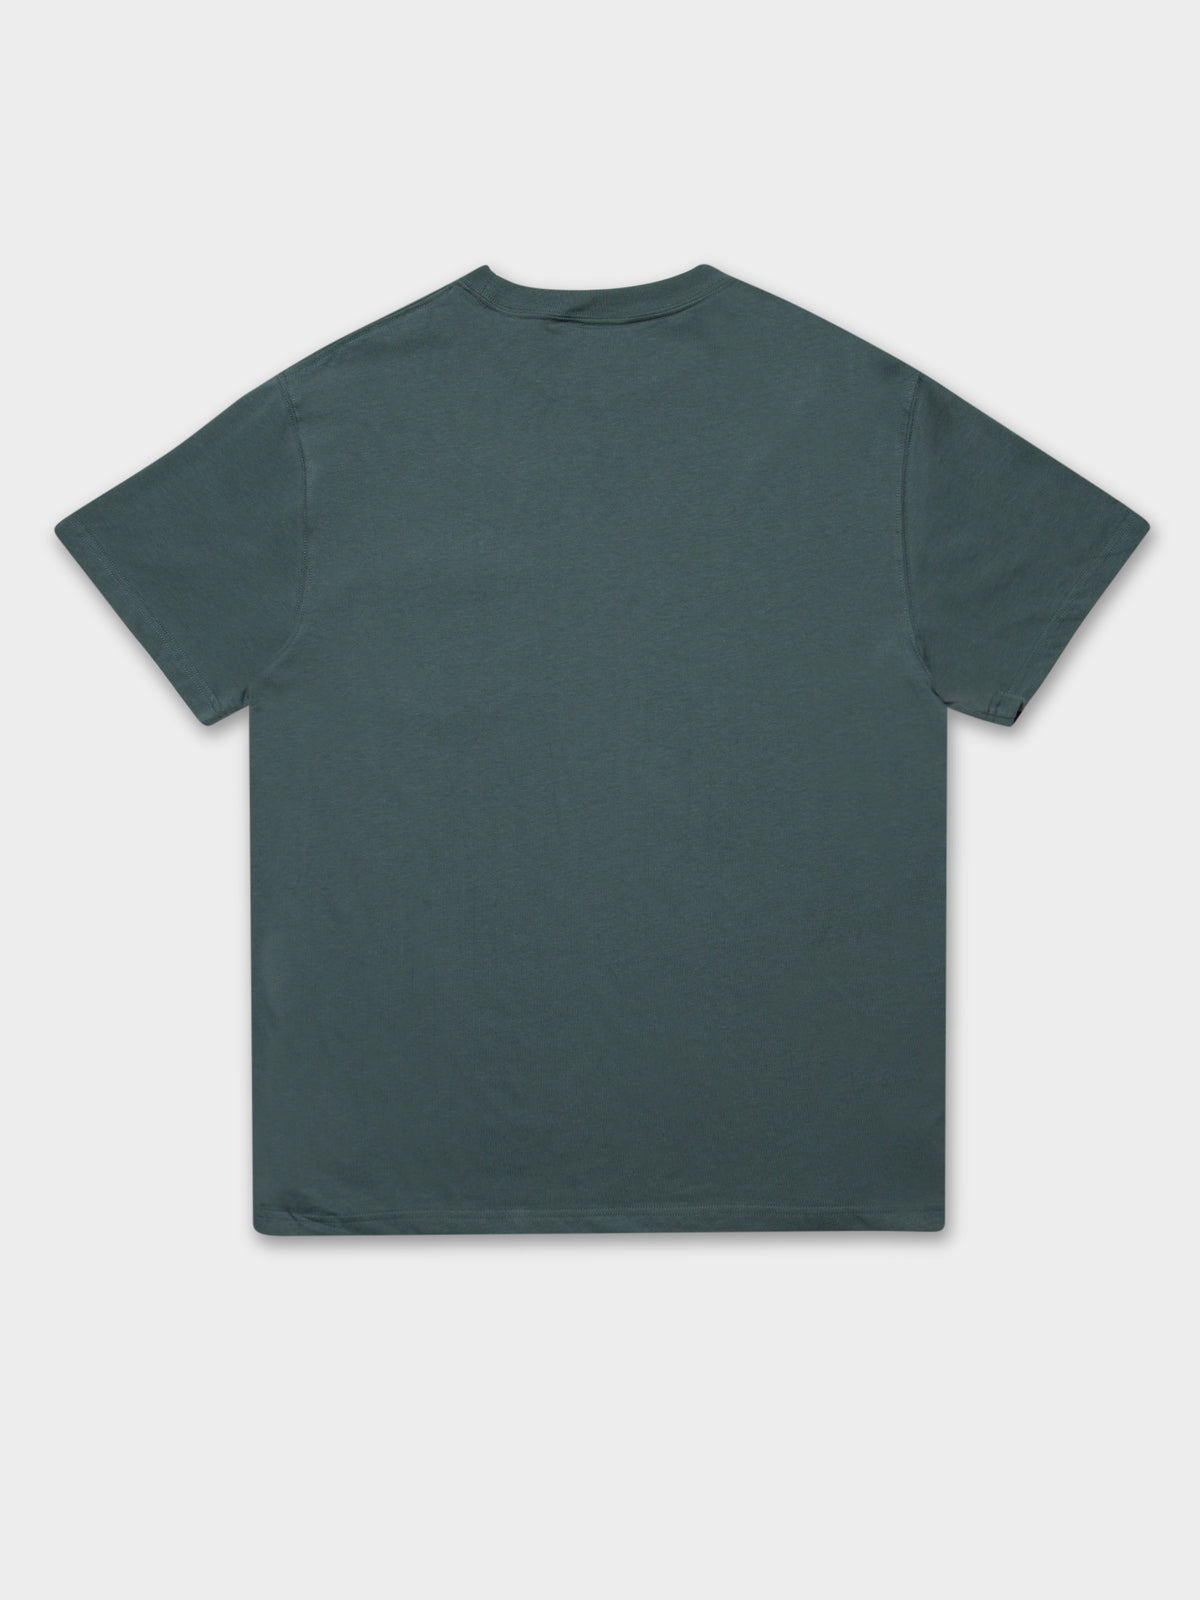 Heavyweight Pocket T-Shirt in Lincoln Green